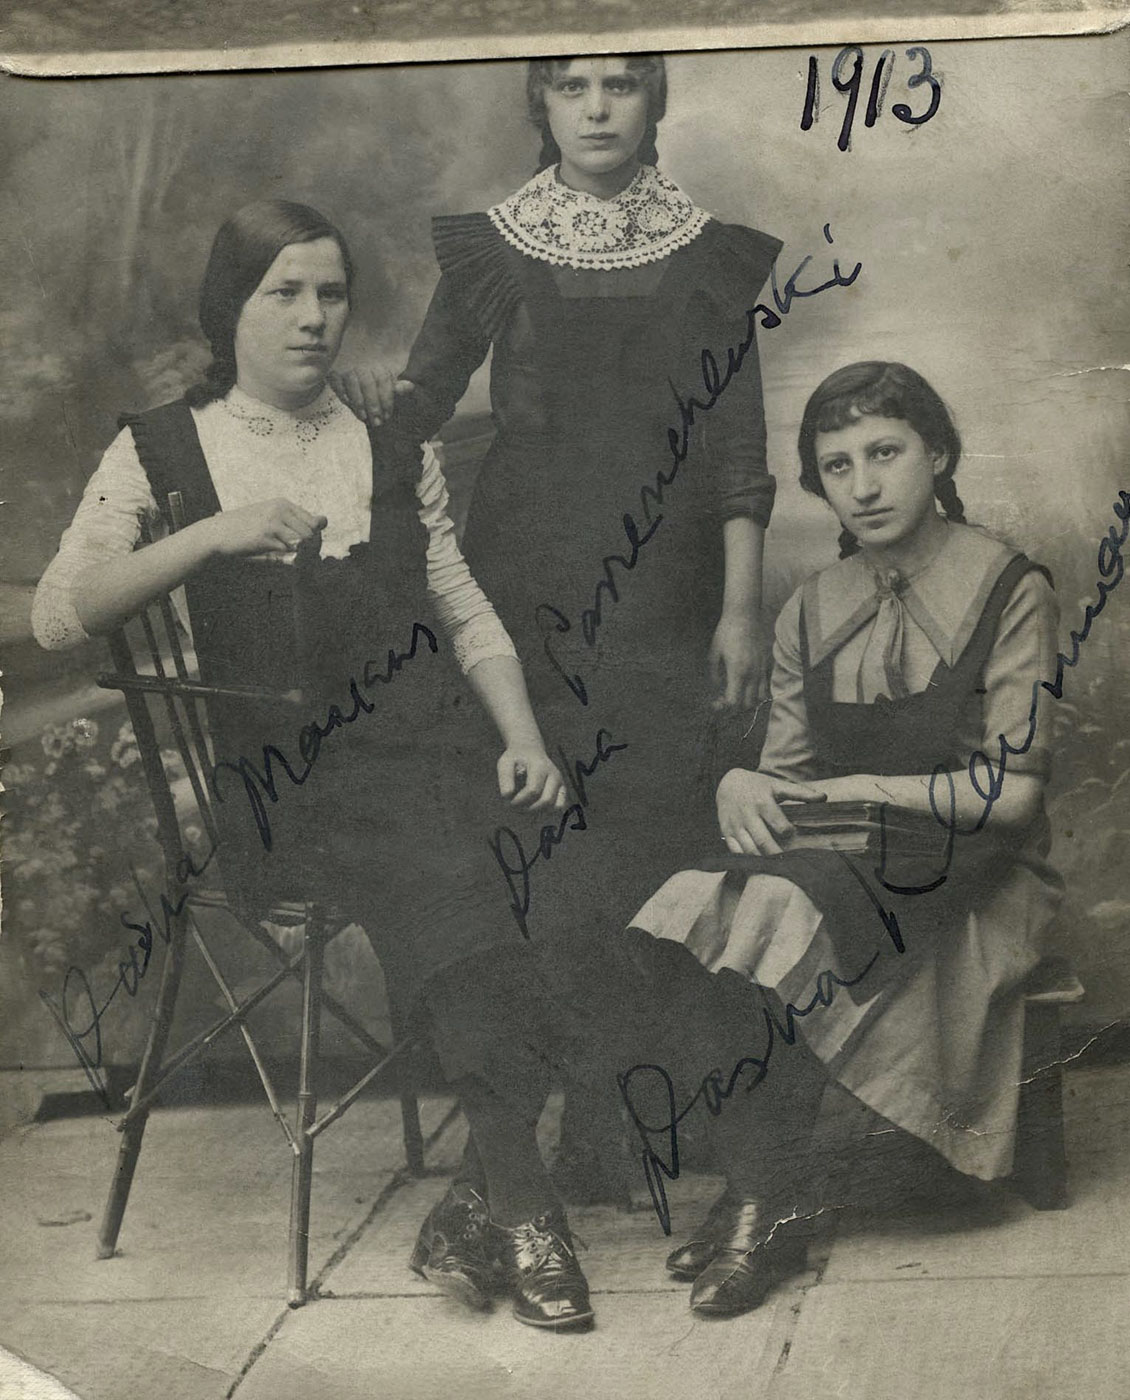 Young girls in Plonsk, 1913